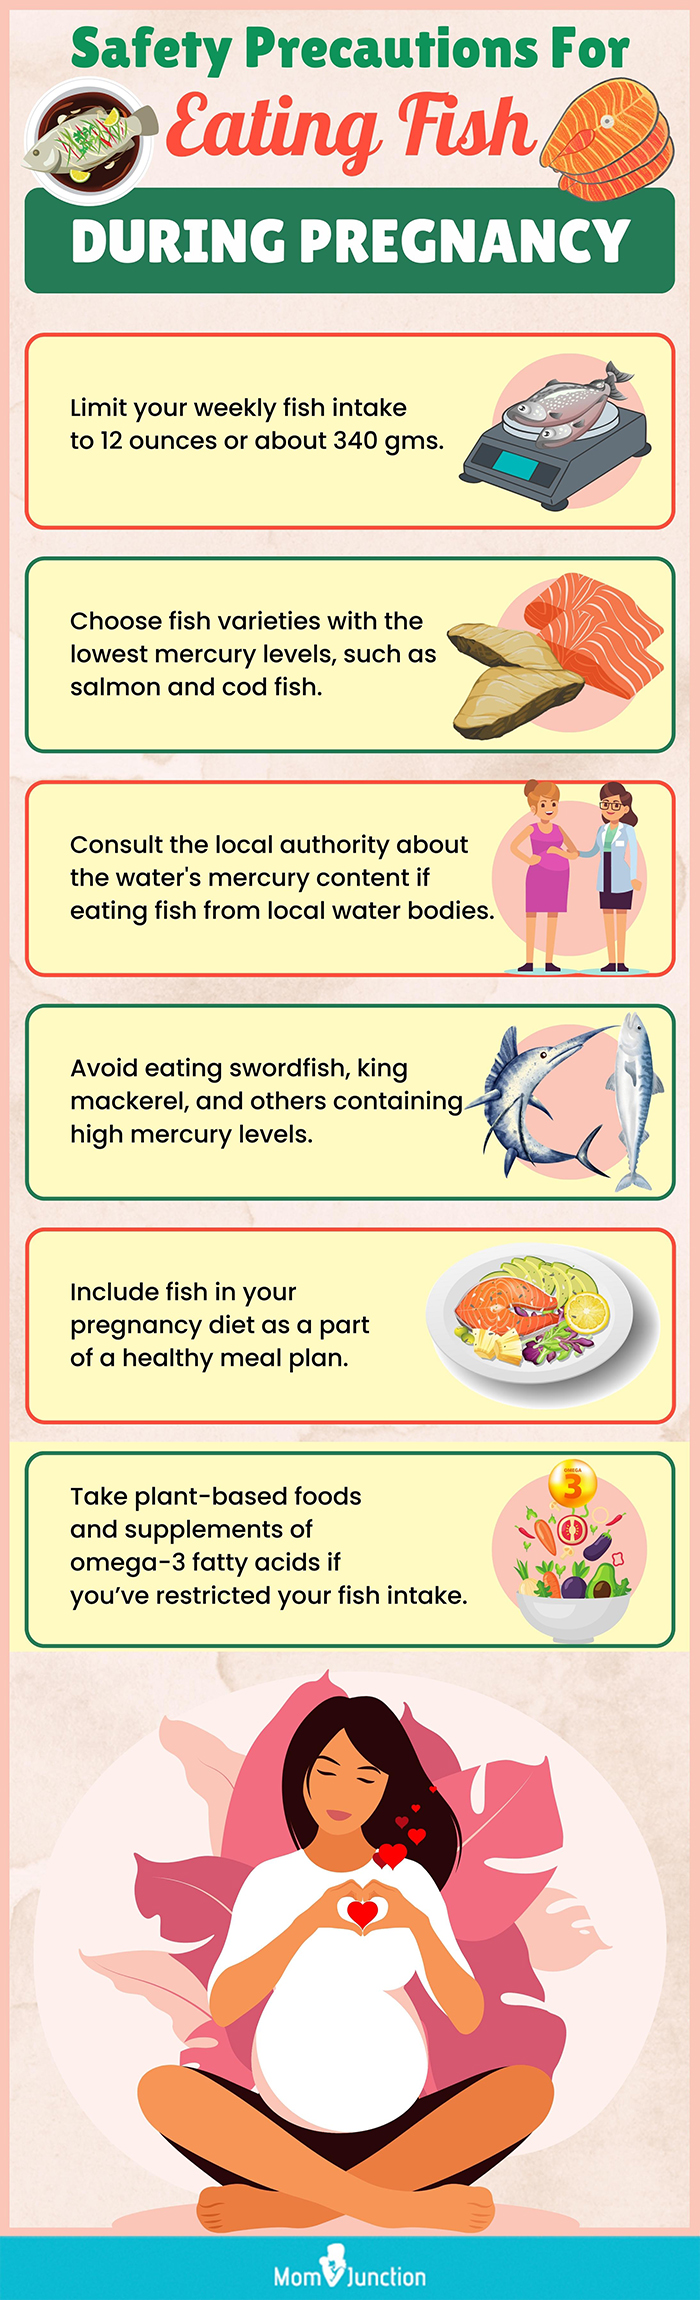 safety precautions for eating fish during pregnancy (infographic)